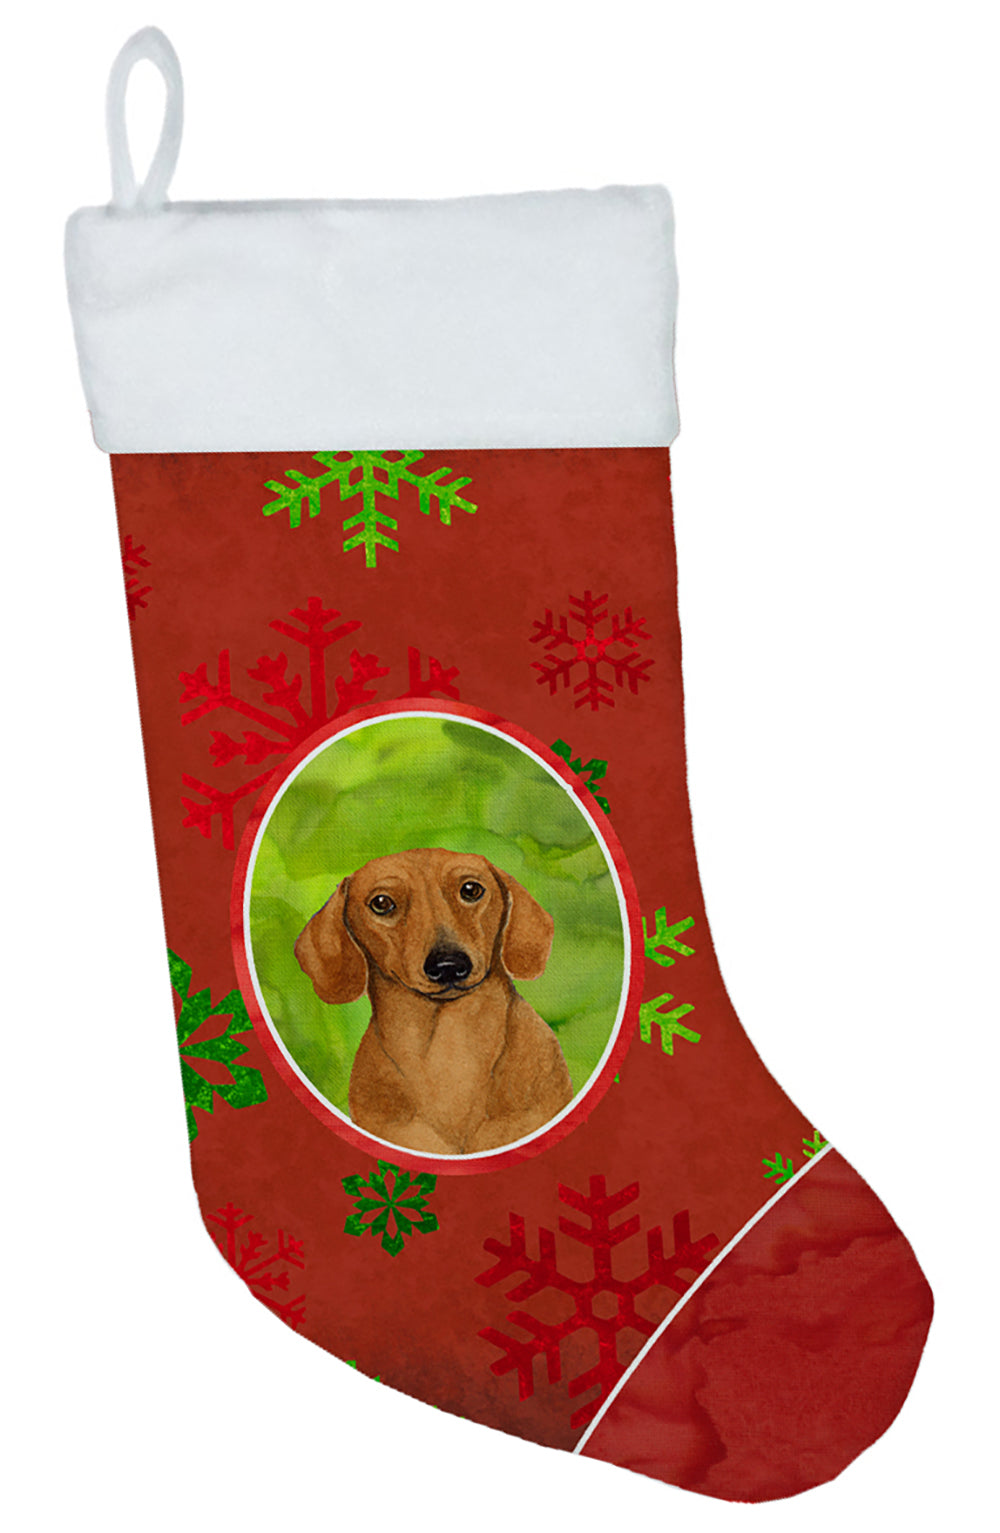 Dachshund Red and Green Snowflakes Holiday Christmas Christmas Stocking LH9312